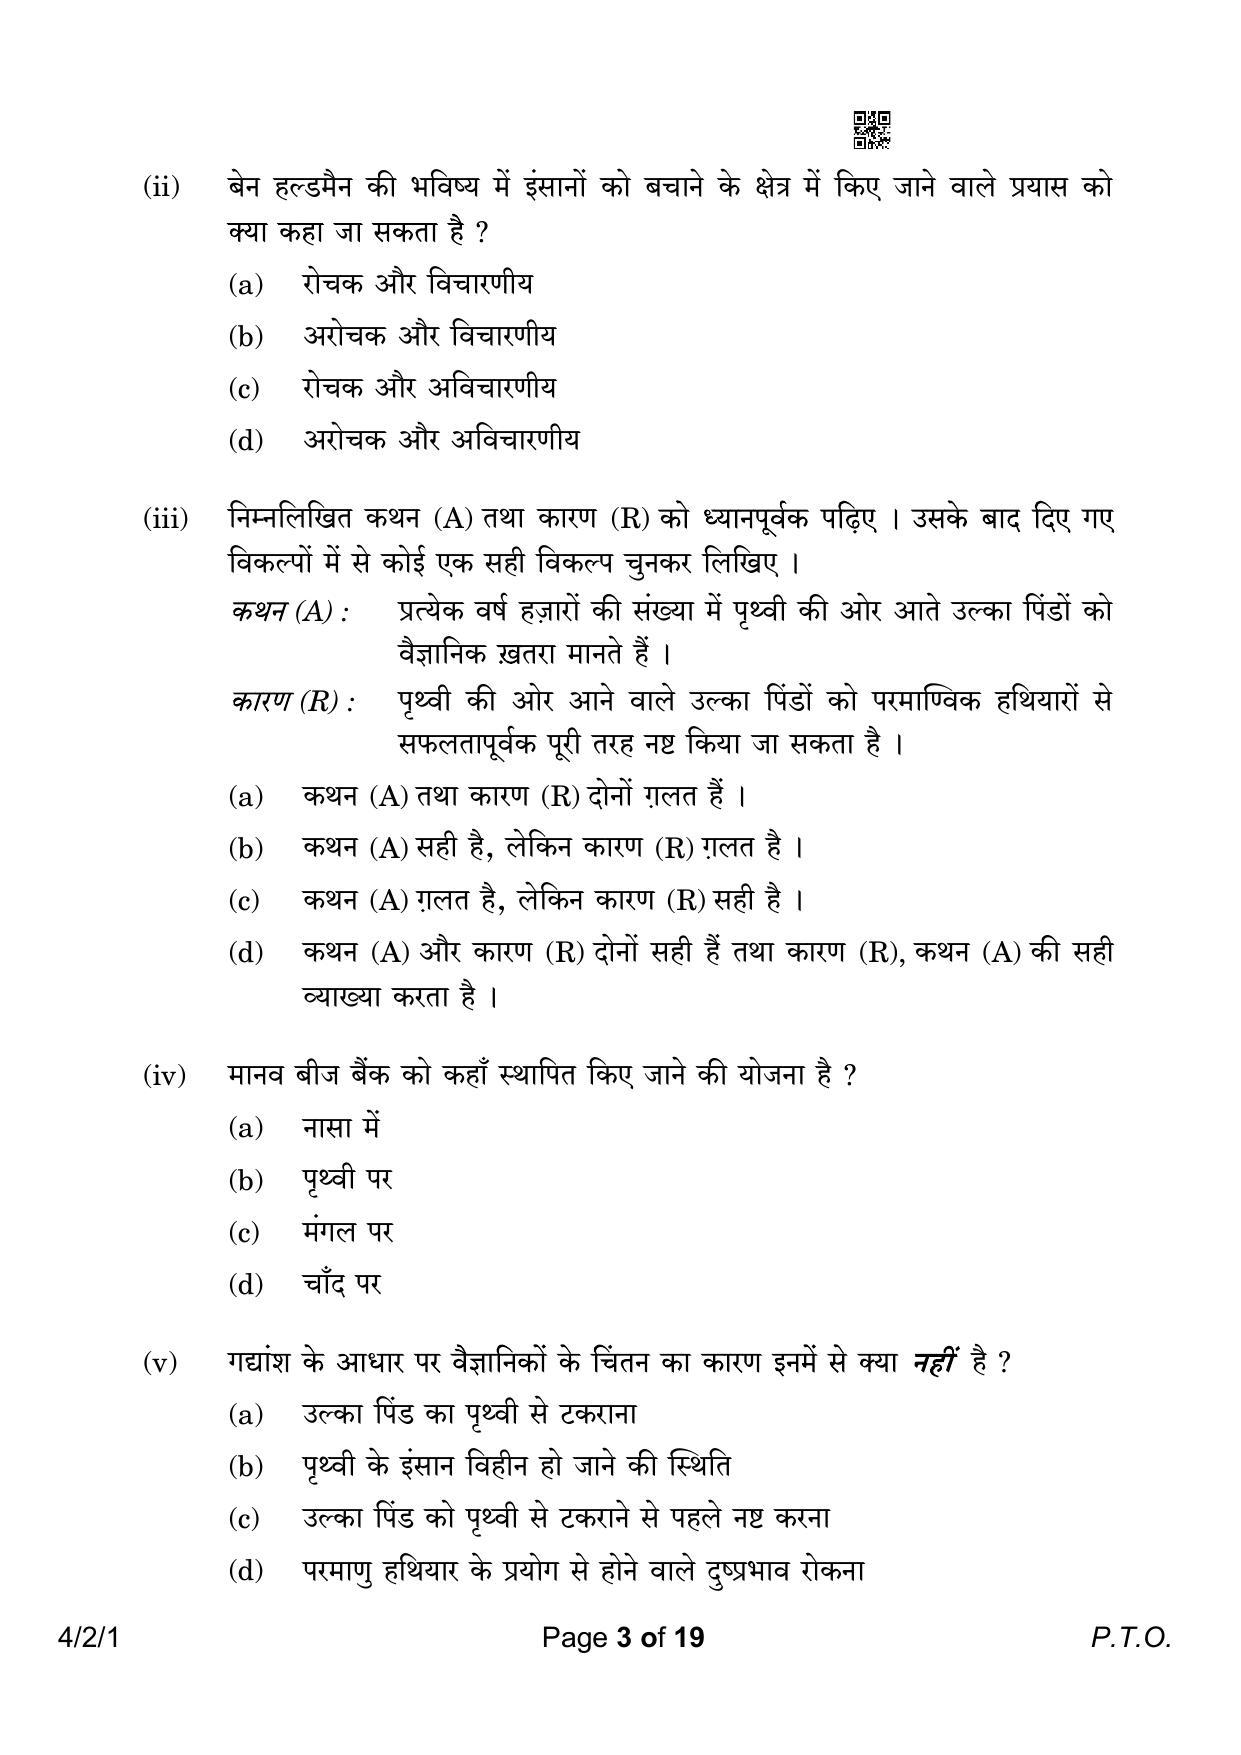 CBSE Class 10 4-2-1 Hindi B 2023 Question Paper - Page 3